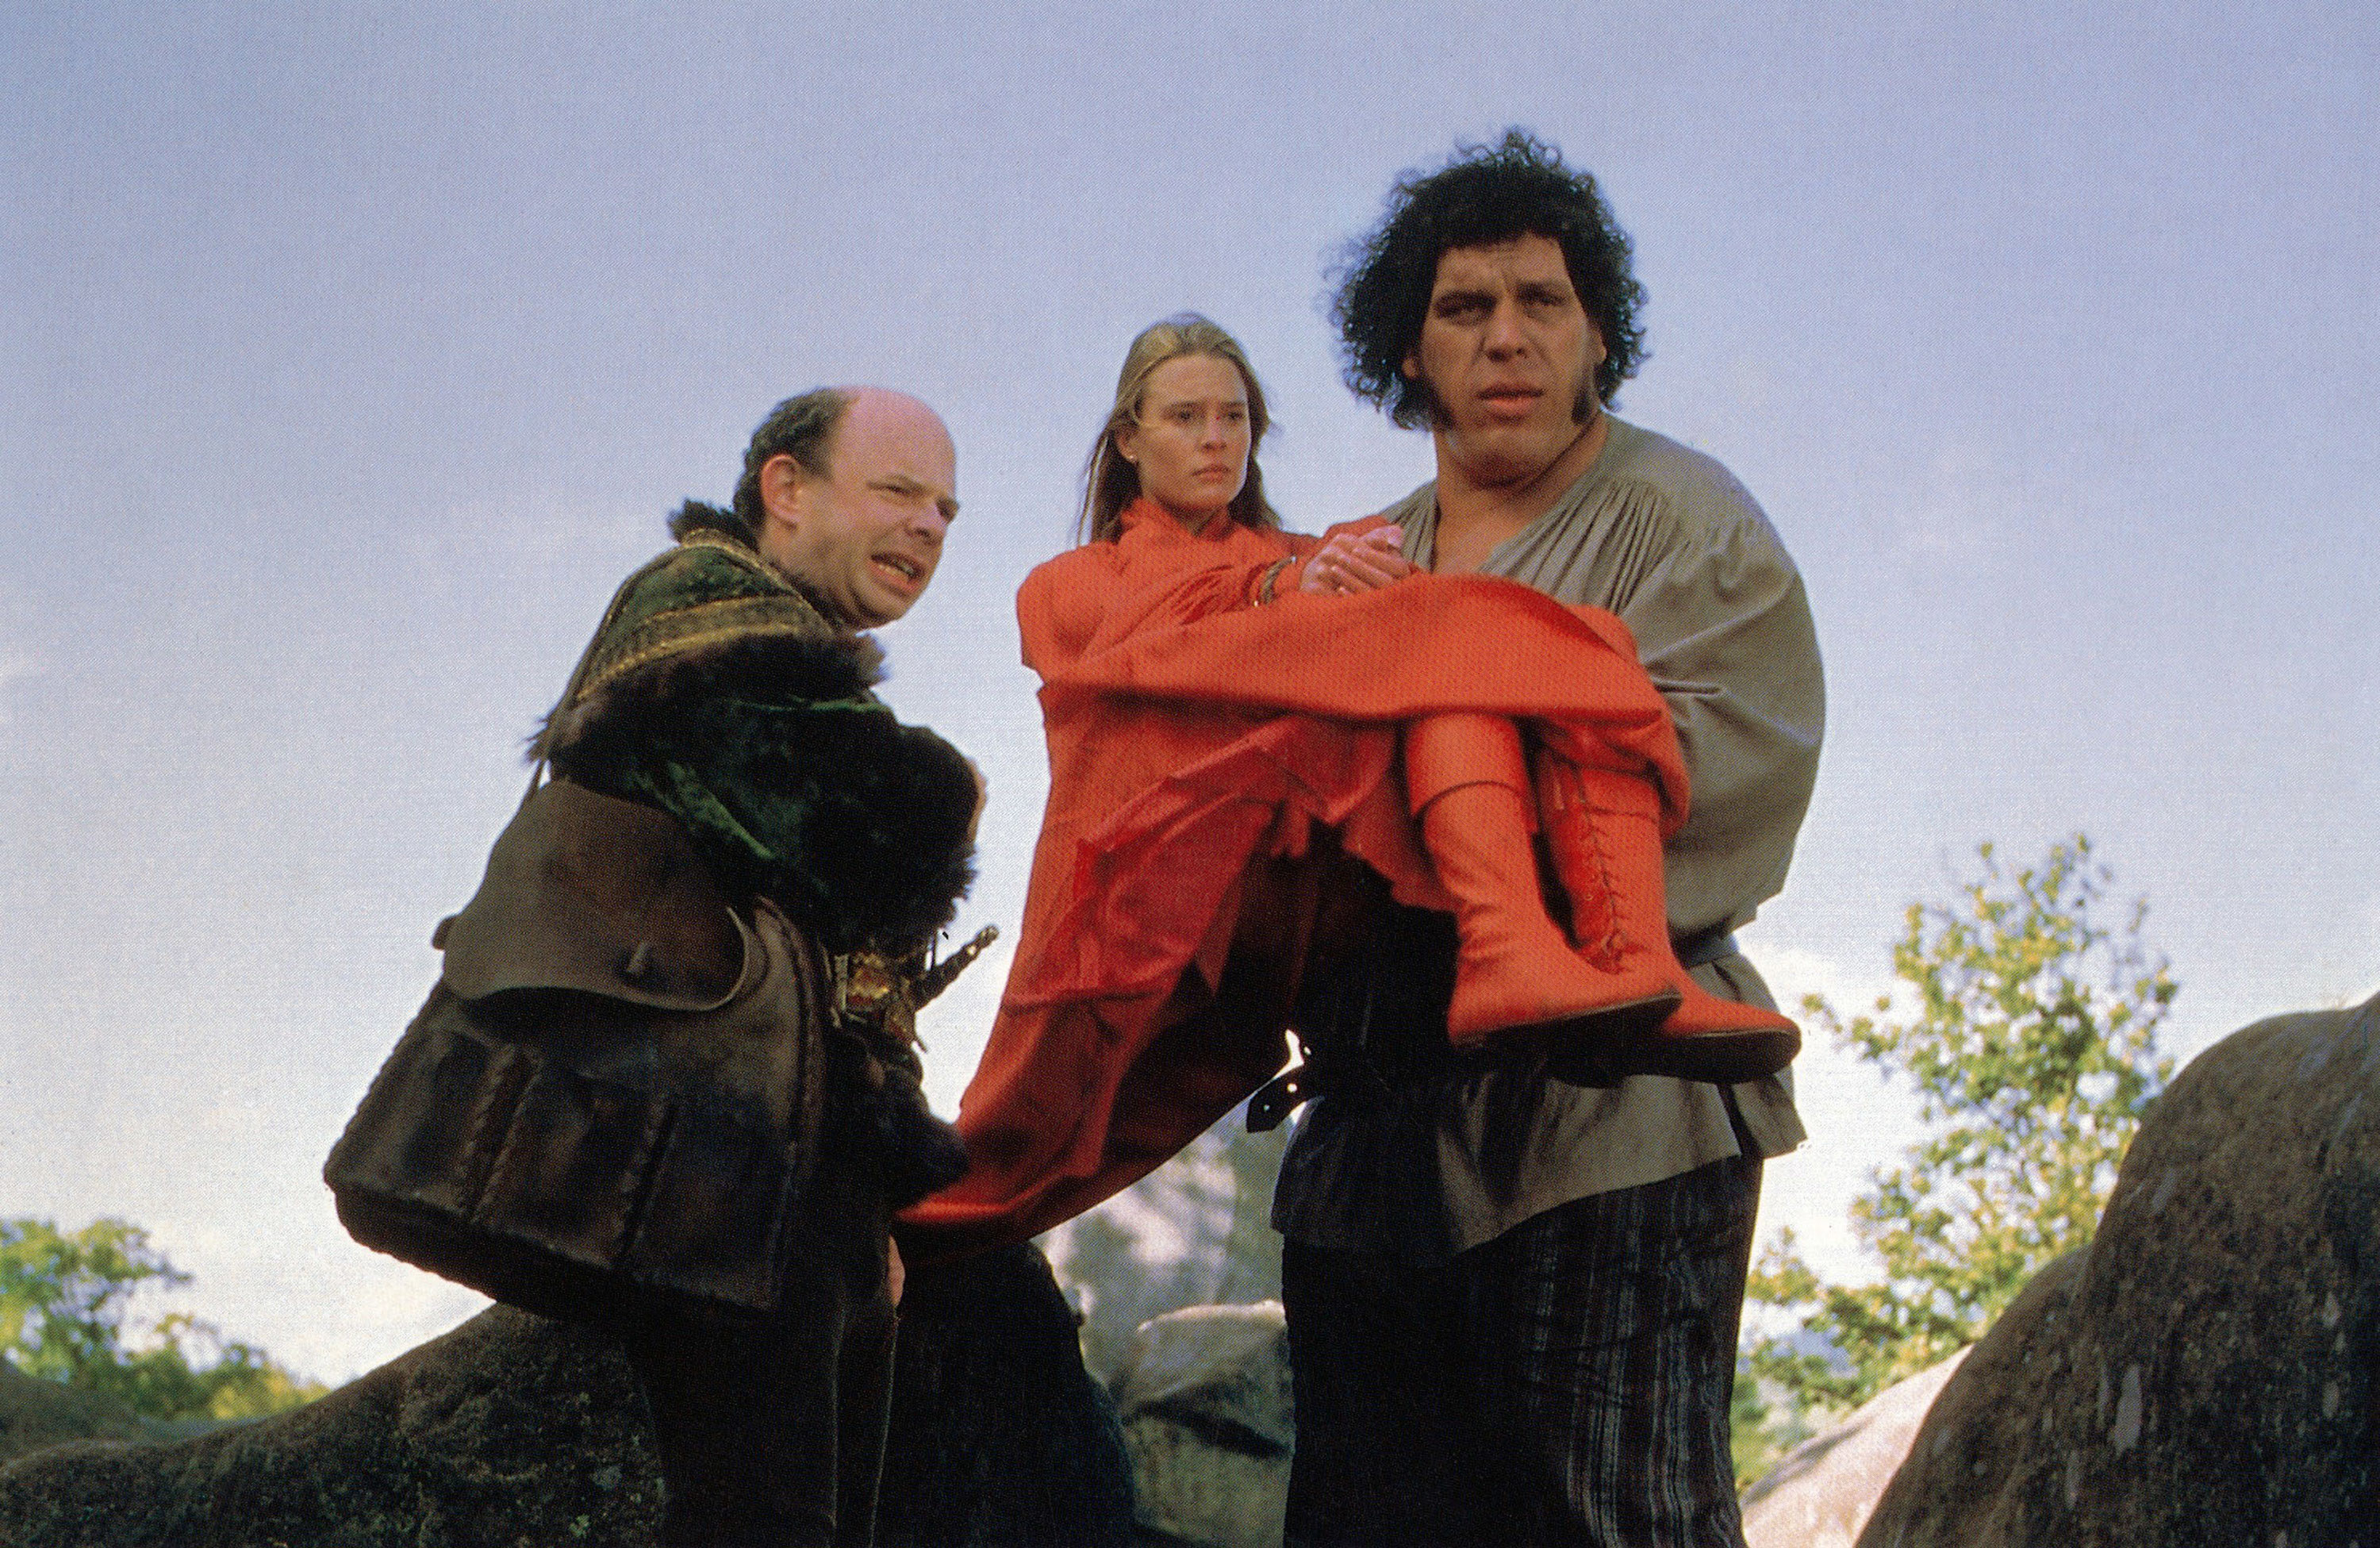 A large man holding a woman in his arms stands next to another man wearing a cape